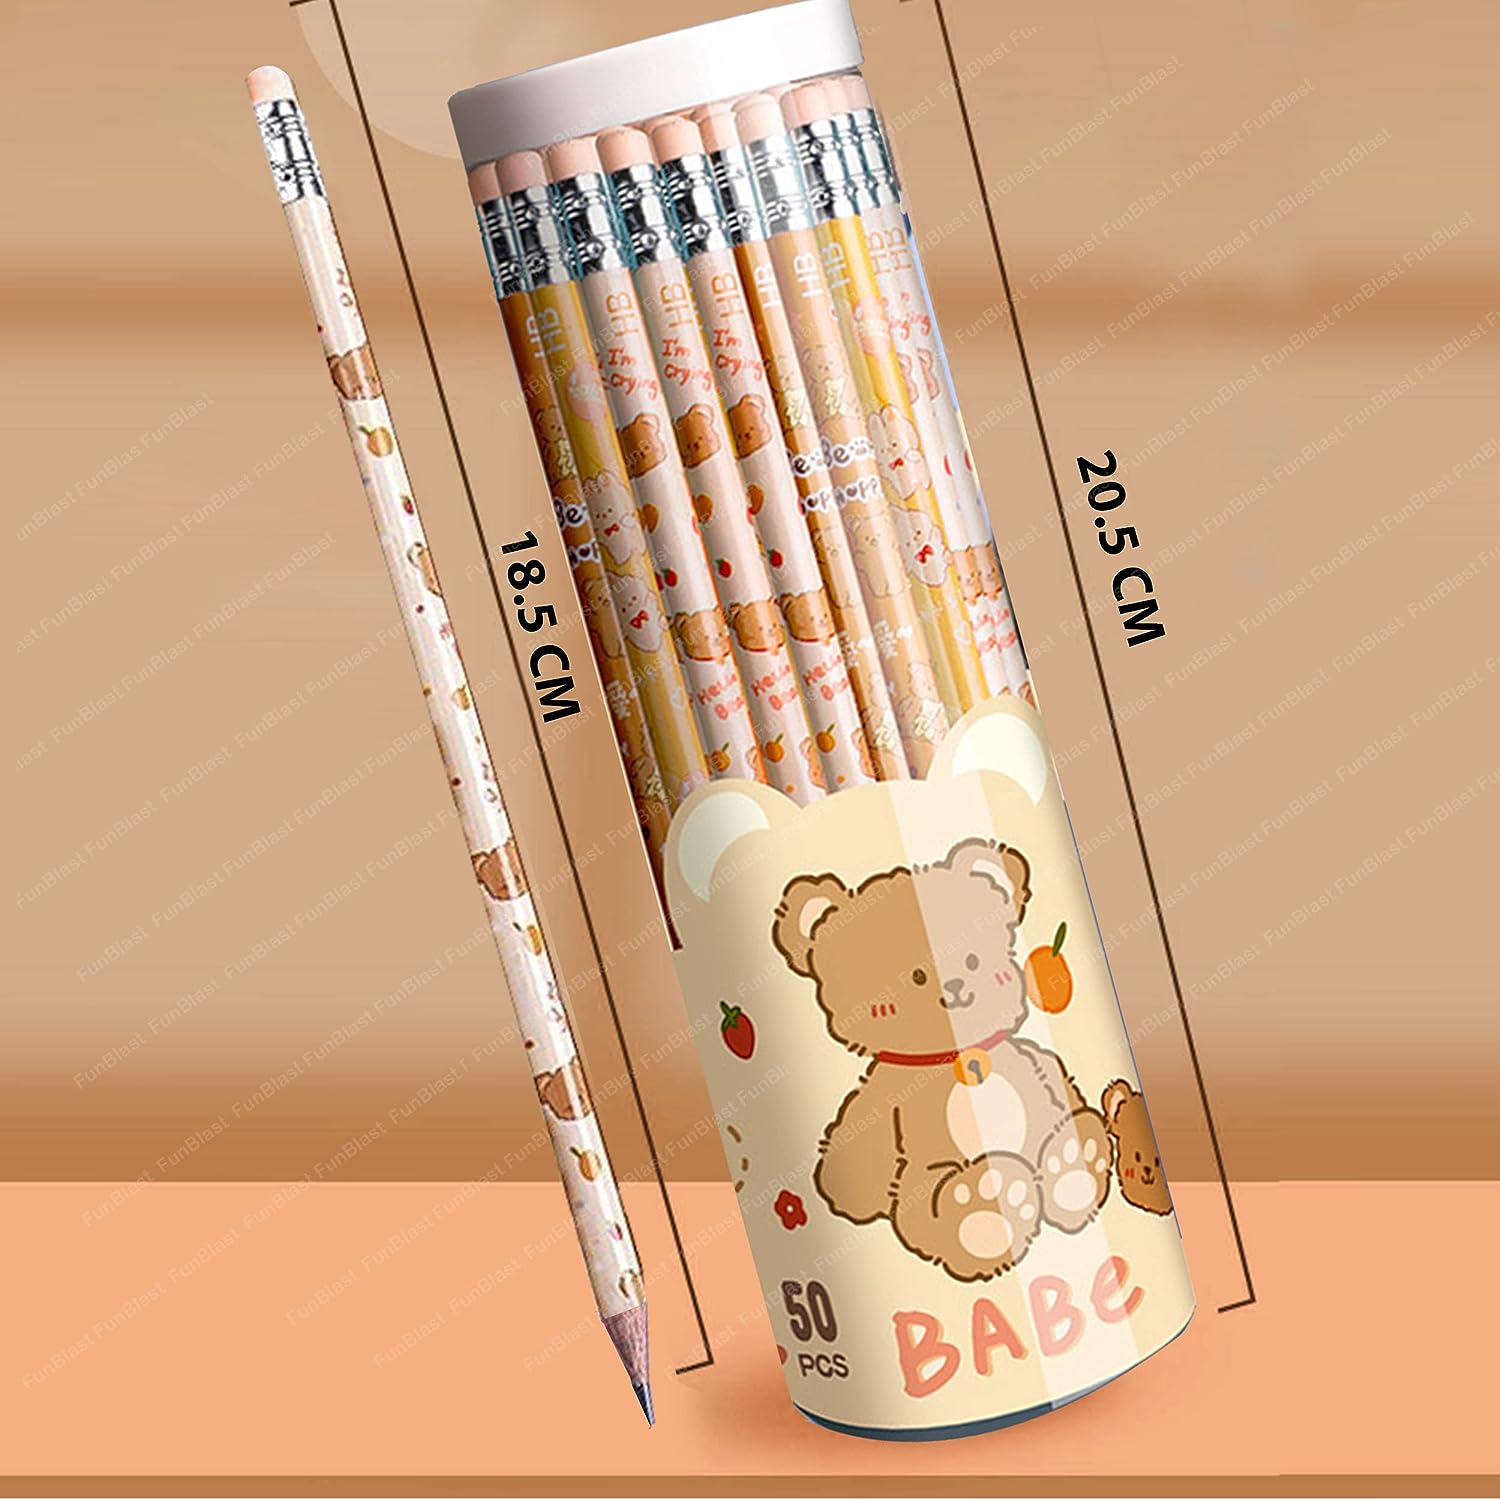 Cute Pencil for Kids, Stylish Pencils Stationary Kit – Space Pencil Set with Erasers for Kids, Pencil for Drawing and Shading, Birthday Return Gift, Stationary Set – 30 Pcs Box Set